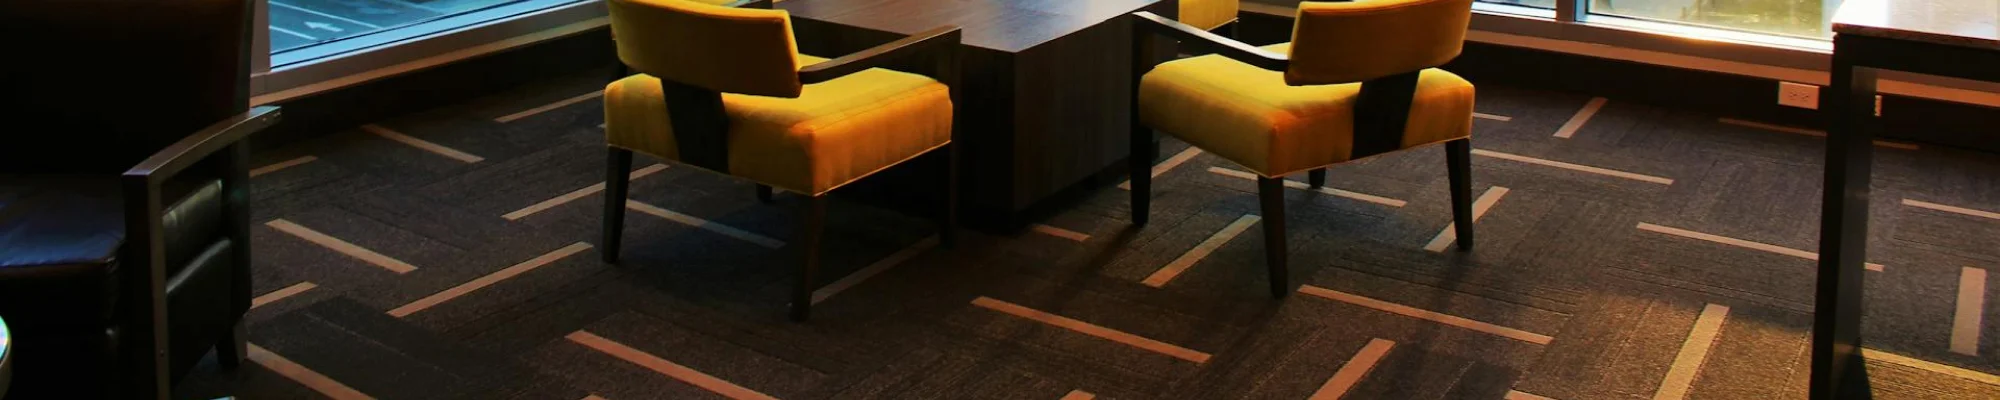 Learn more about the Commercial flooring services offered by CC Carpet in Bedford & Mesquite, TX.